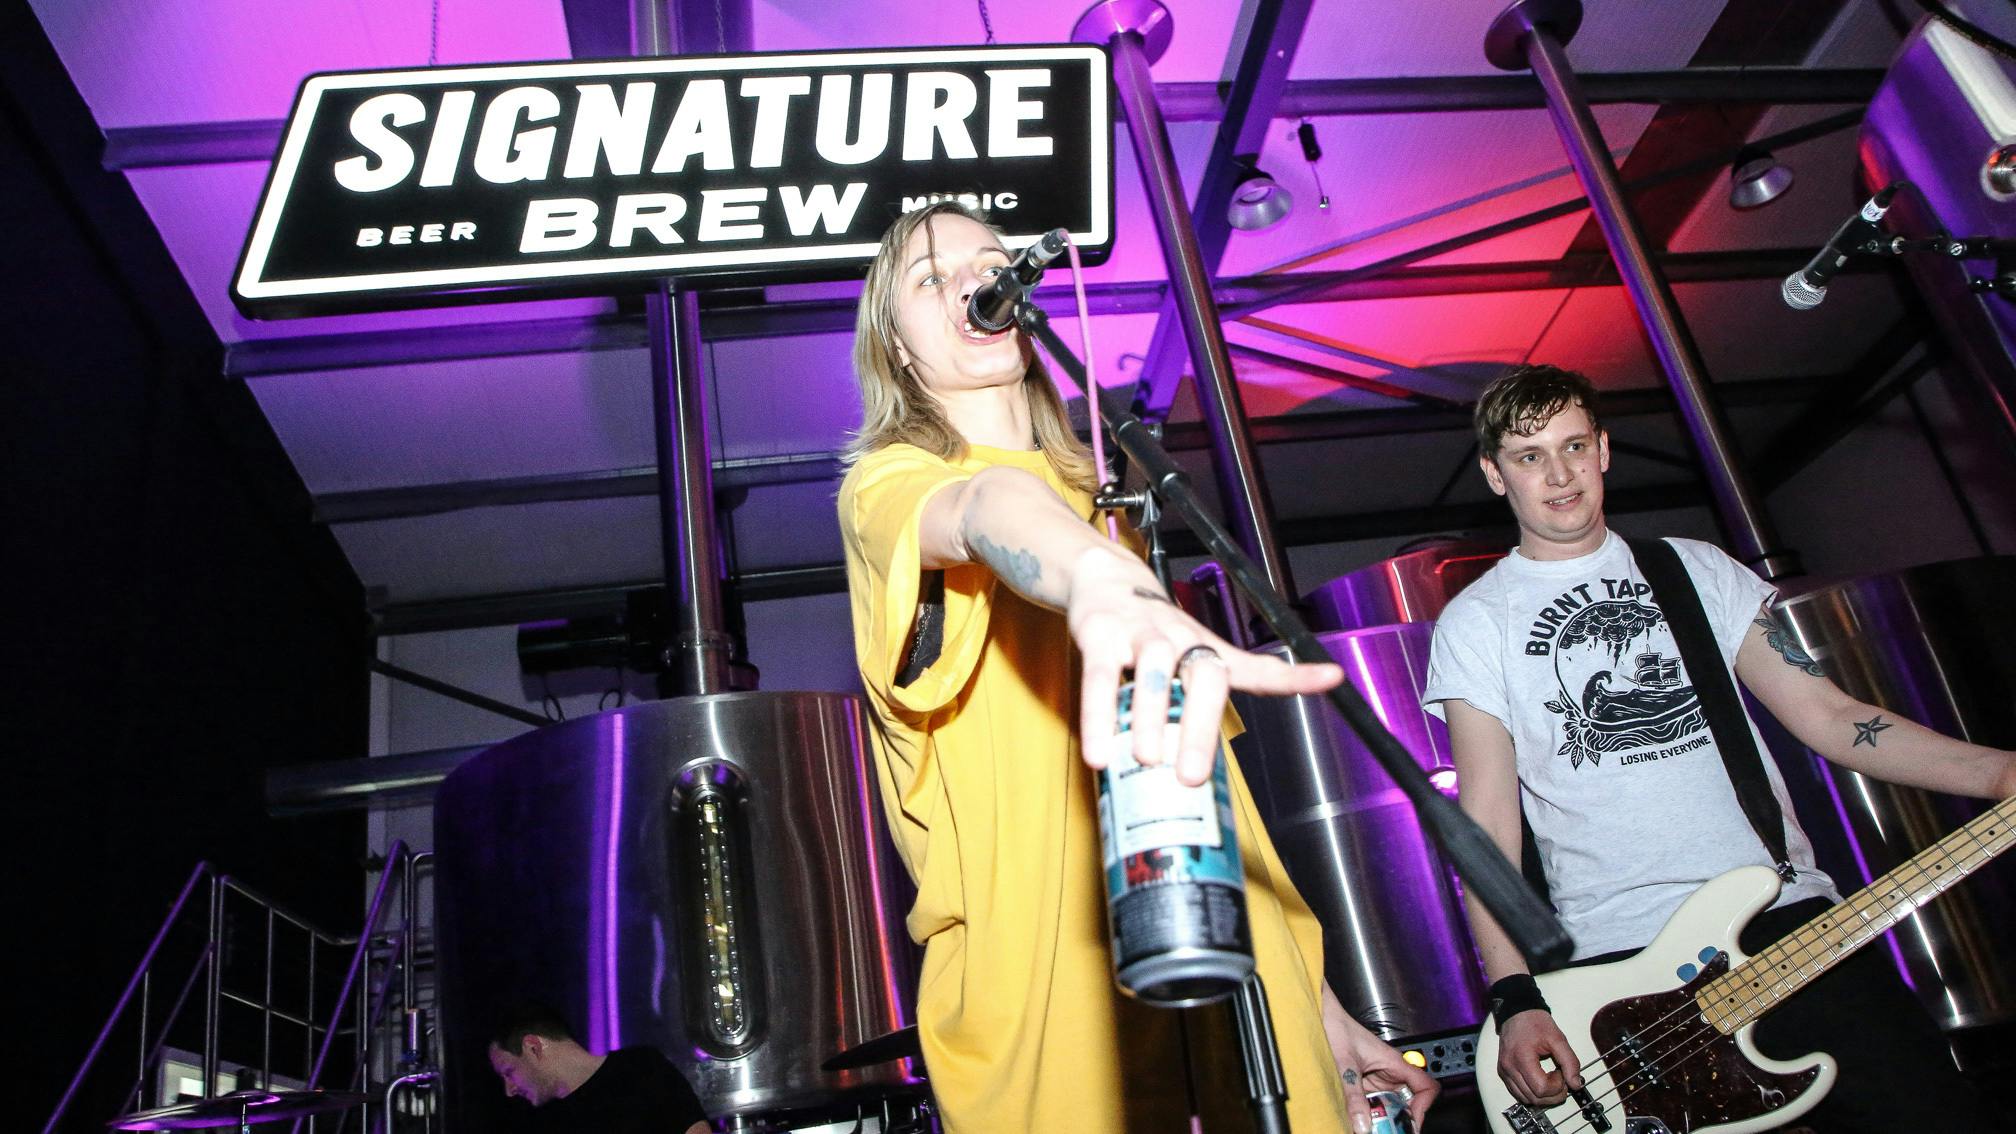 Meet Signature Brew: The World’s Most Rock’N’Roll Brewery